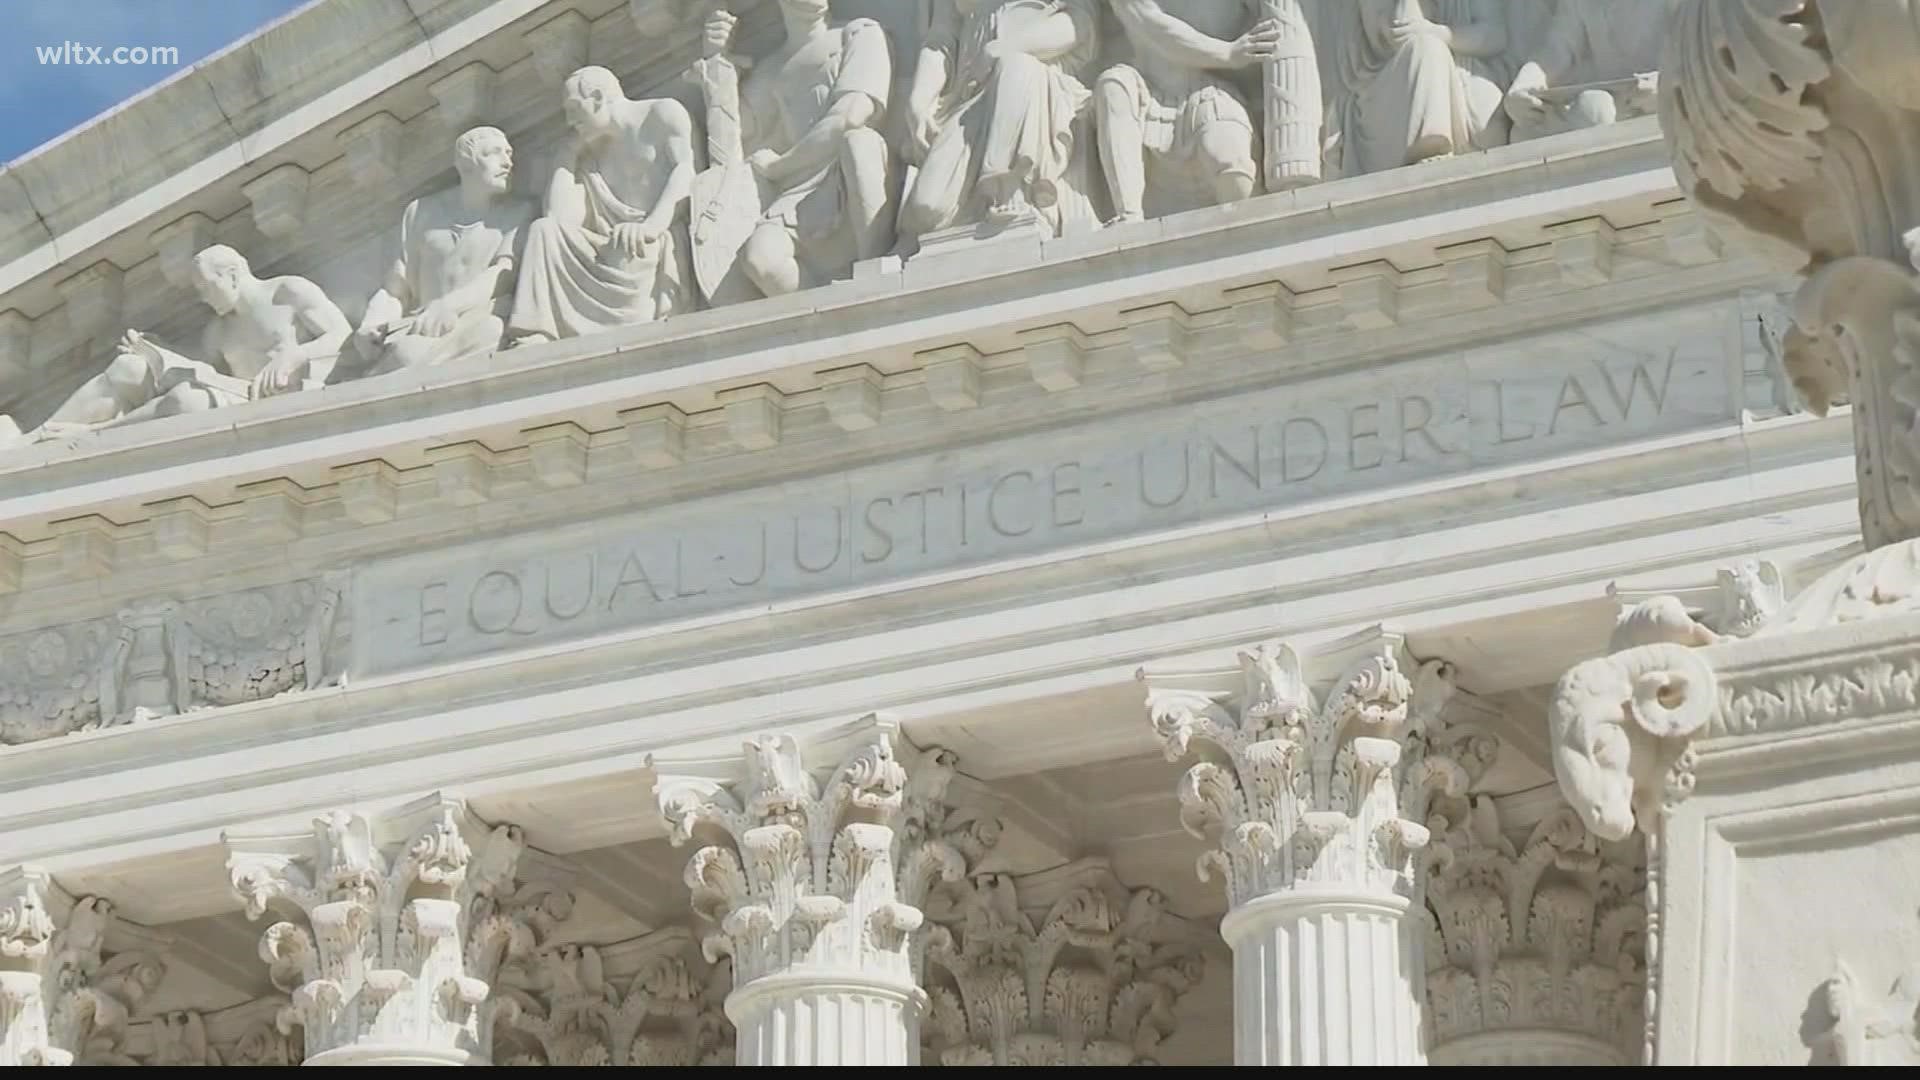 The term that kicked off in October officially came to a close Thursday, with the justices issuing its final two decisions.